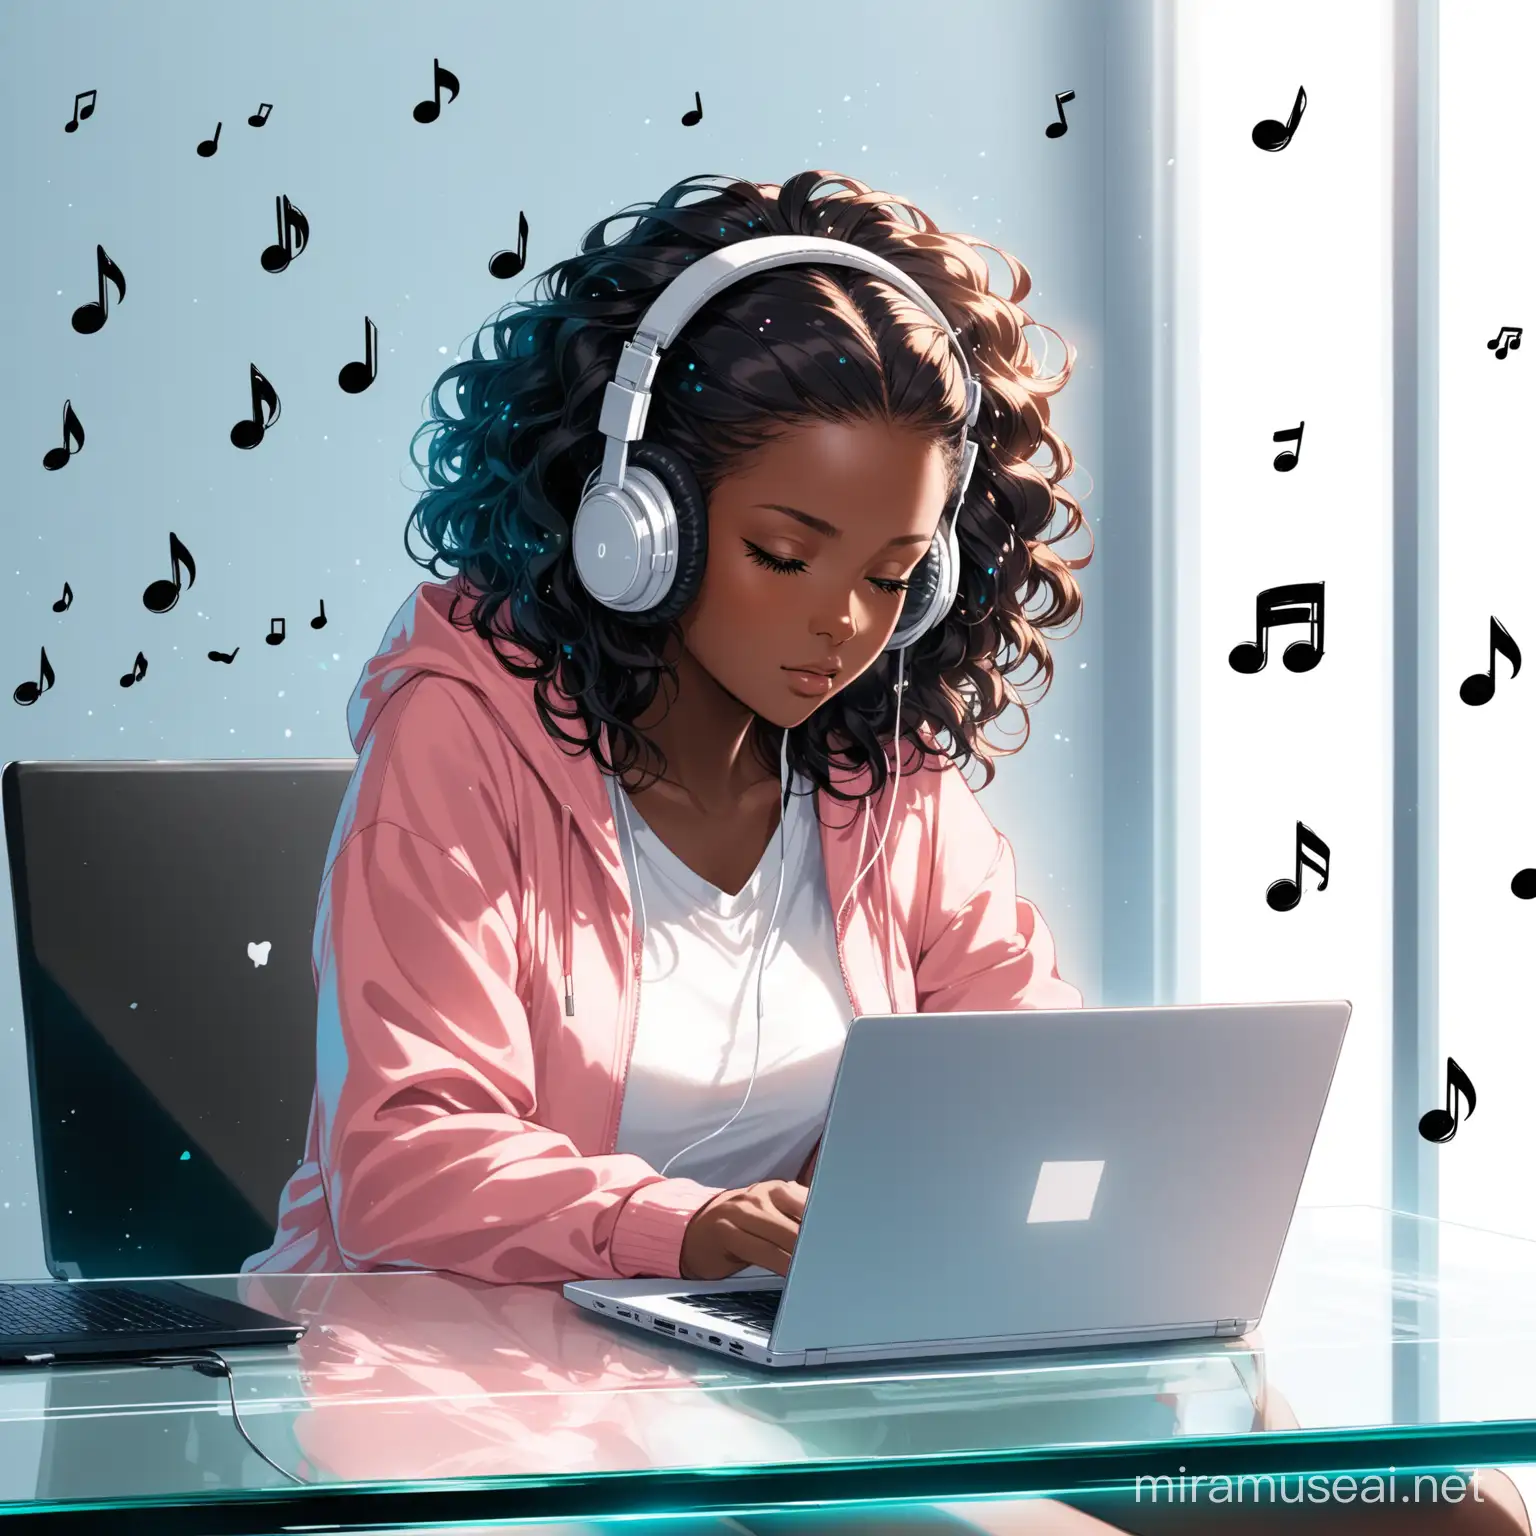 A black woman with semi puffy hair working on her unbranded laptop sitting on a glass desk with headphones on with music notes coming out of headphones. 